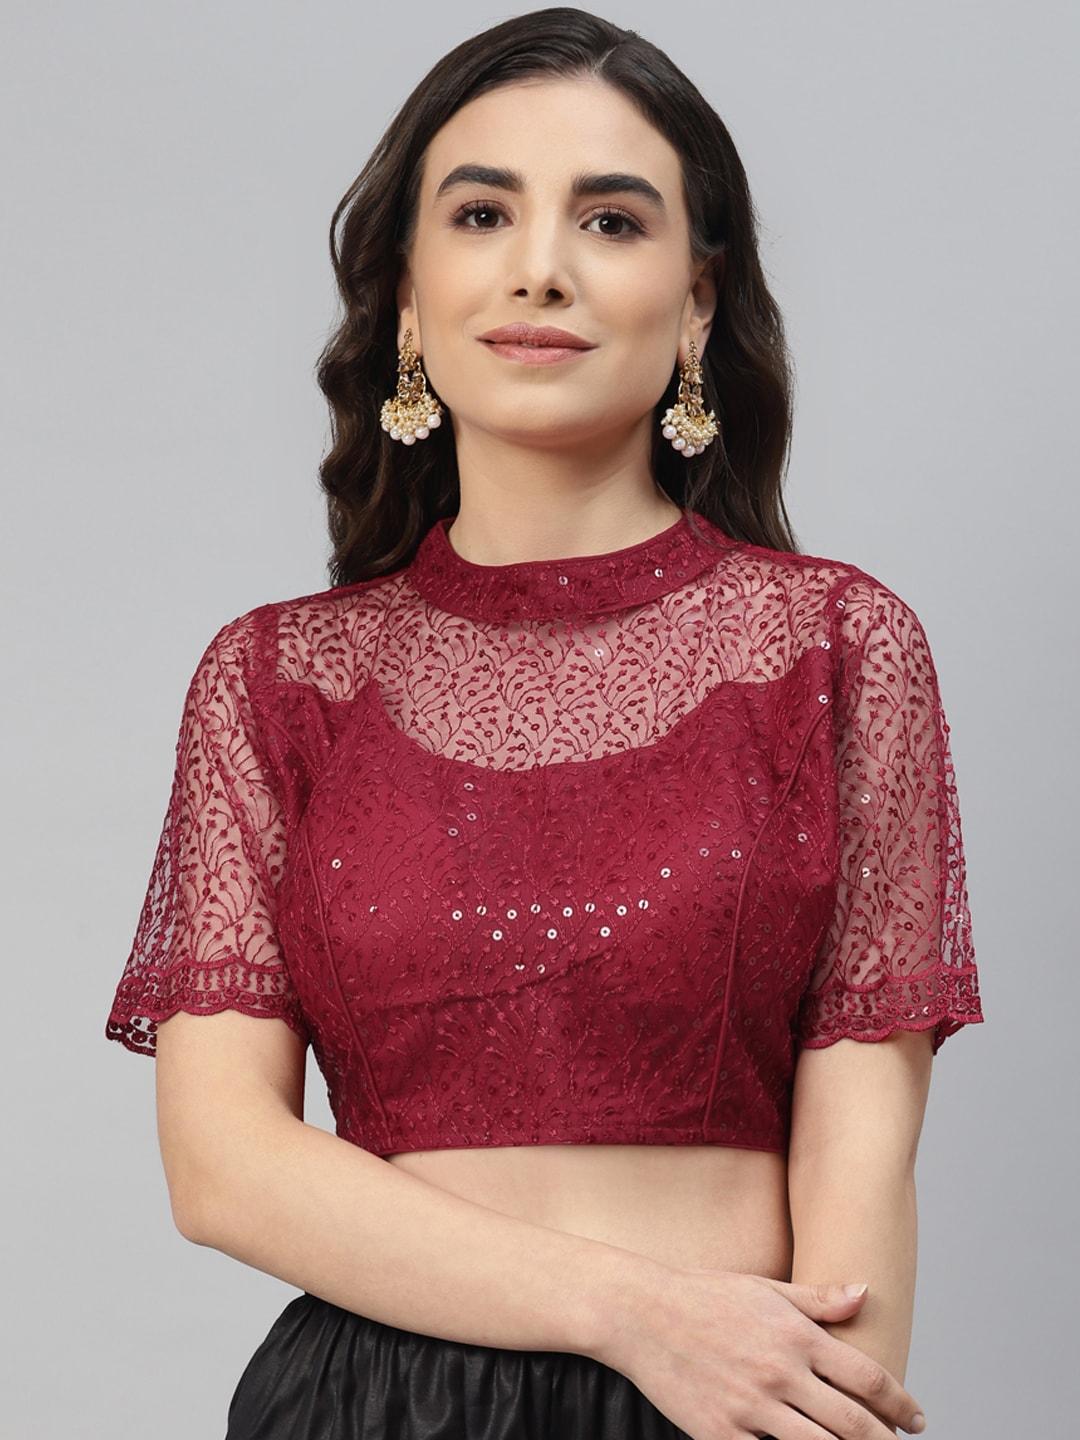 SHOPGARB Maroon Sequinned Net Saree Blouse